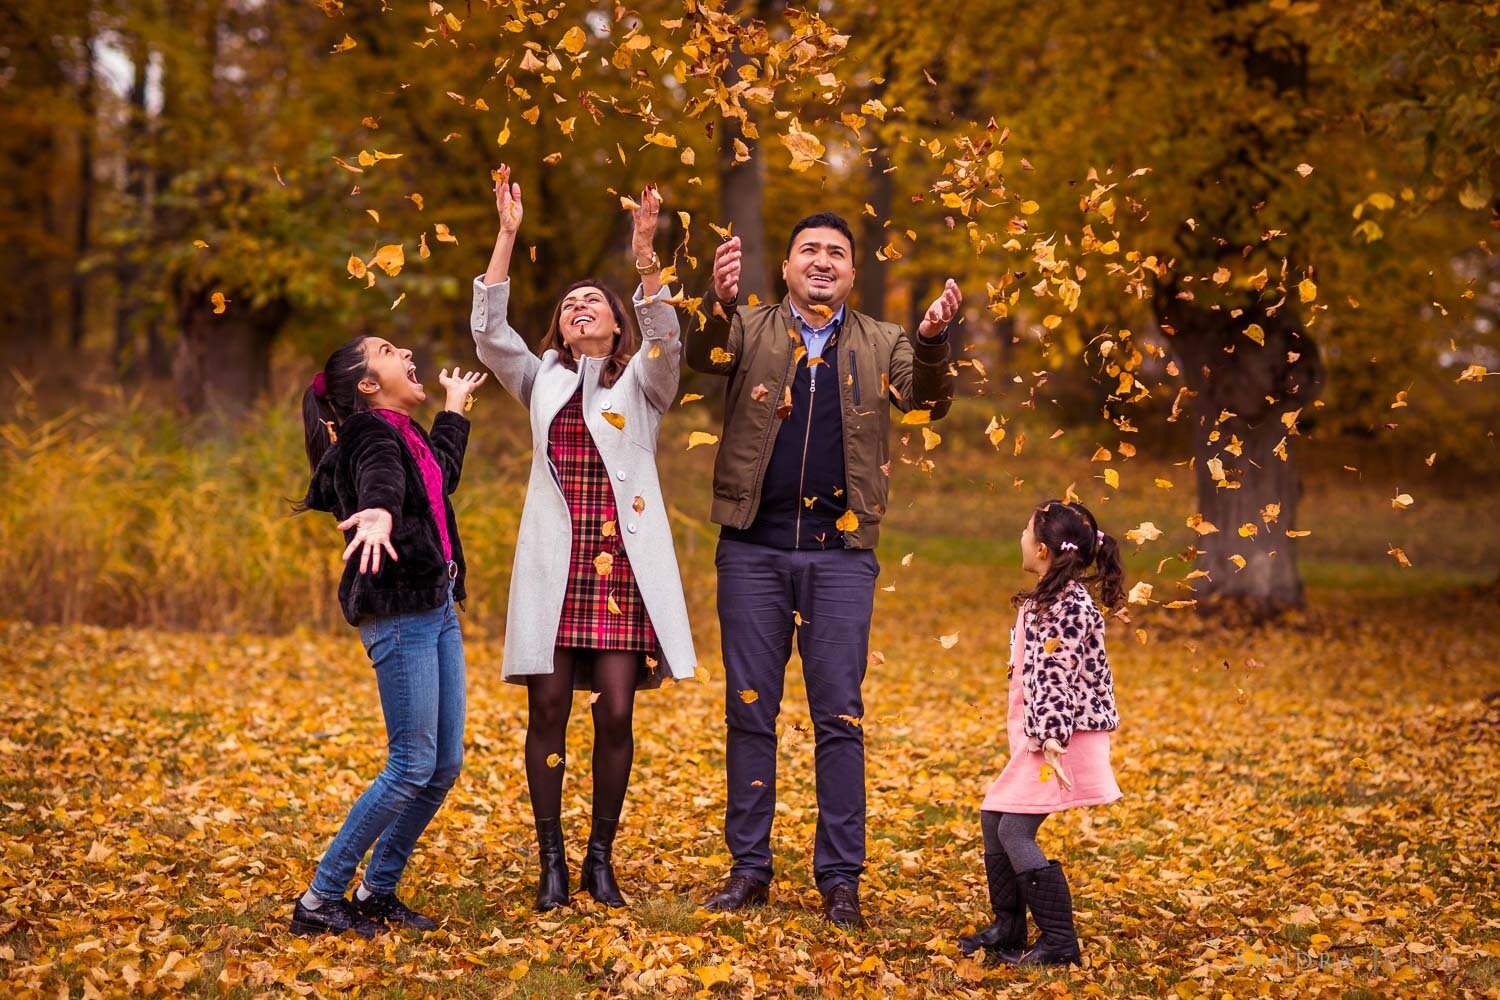 fun-family-autumn-photo-session-at-Ulriksdals-Slott-by-sandra-jolly-photography.jpg